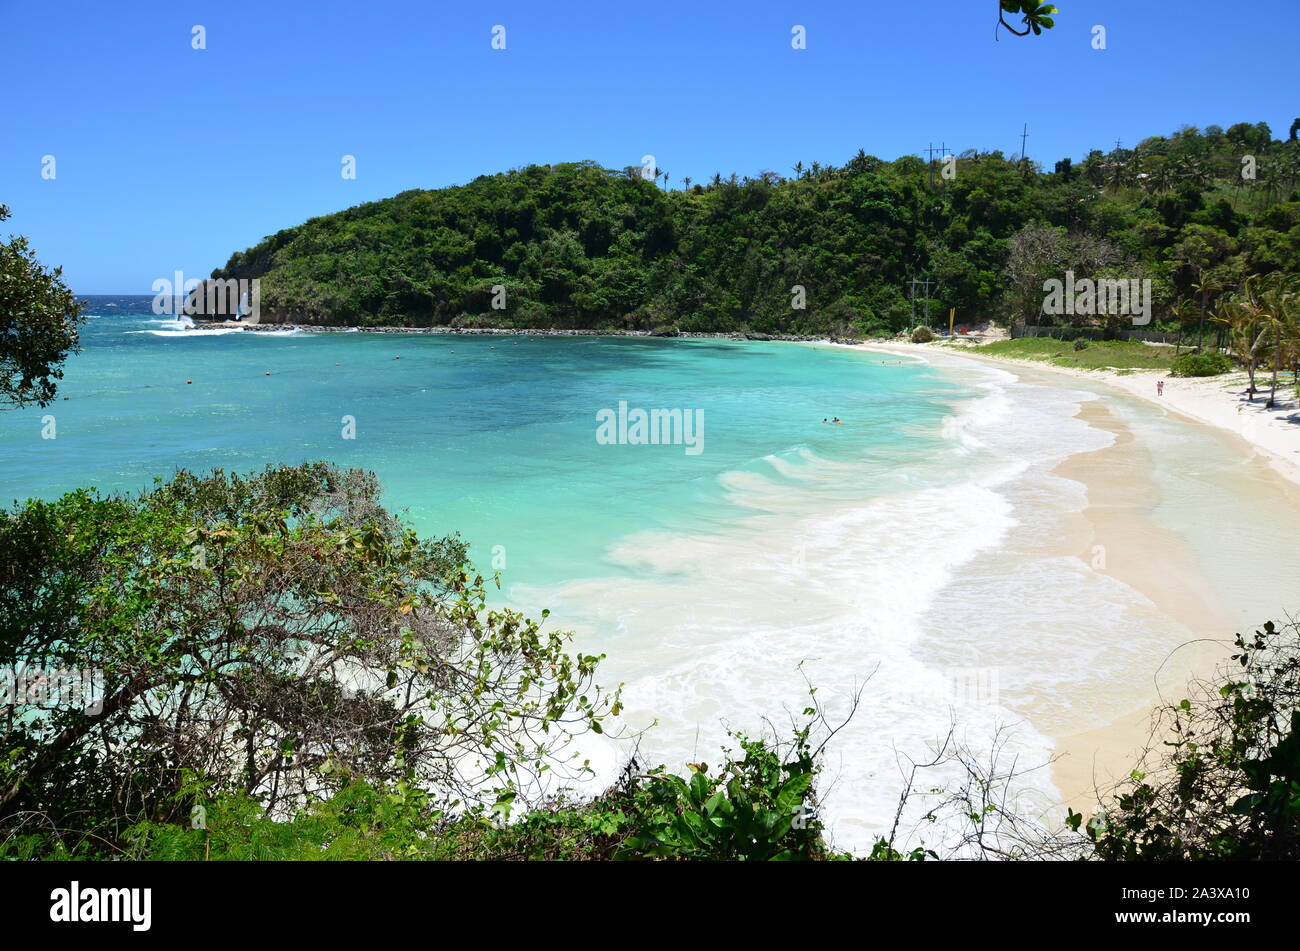 The view of the beach and sea - crystal clear waters of tropical island Stock Photo